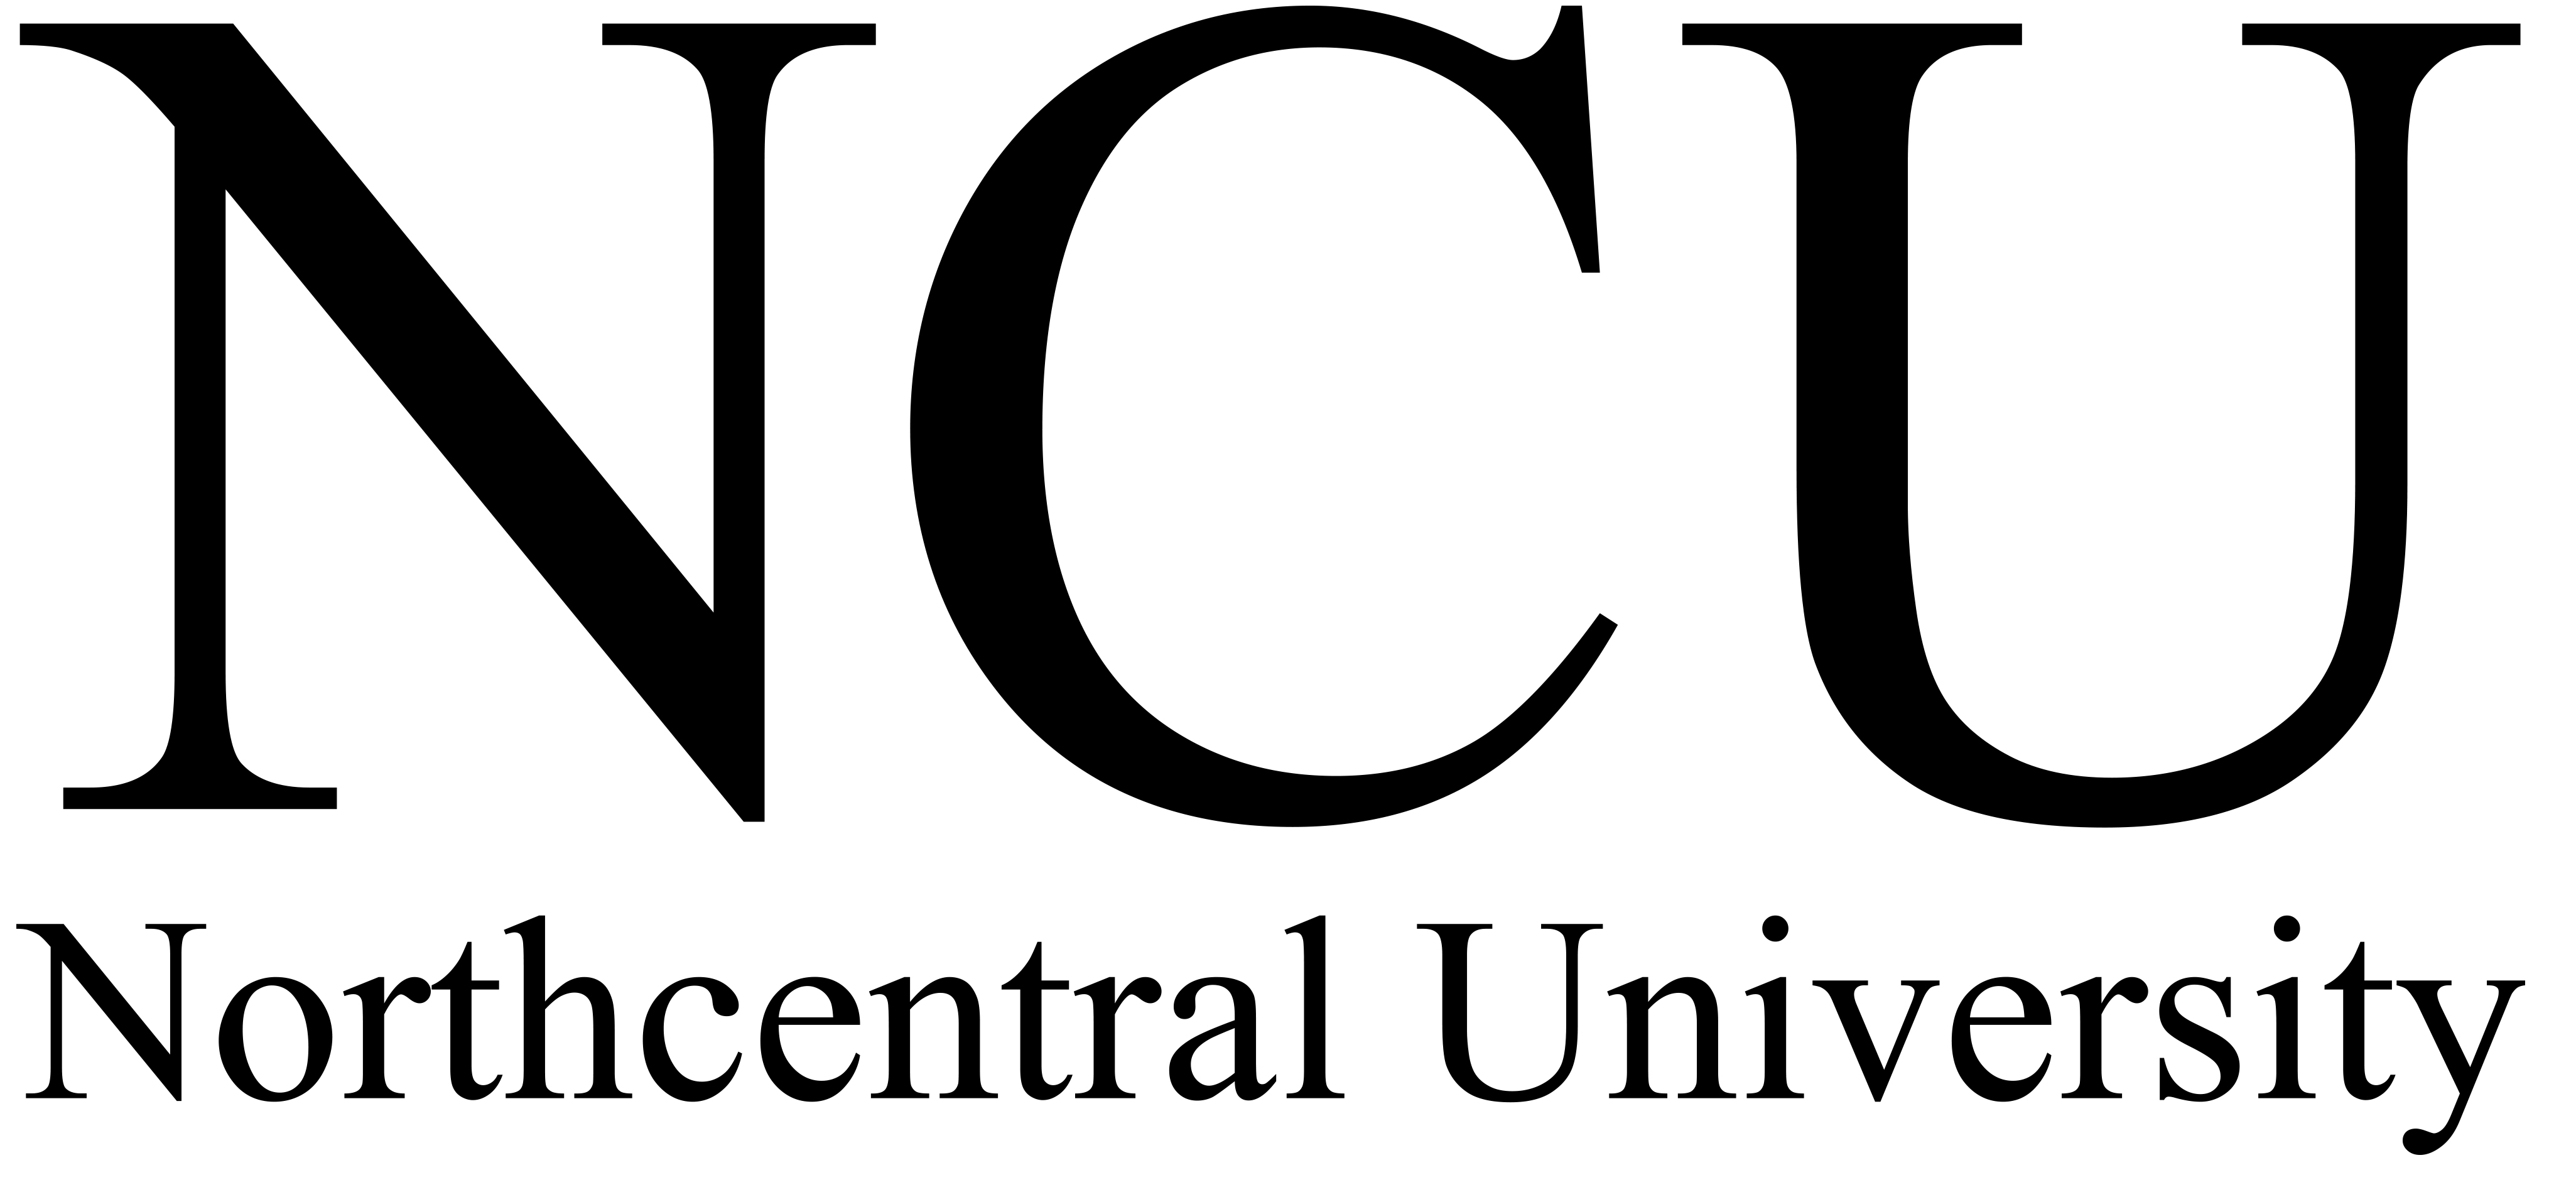 Ten Northcentral University Students To Receive Half Off Tuition